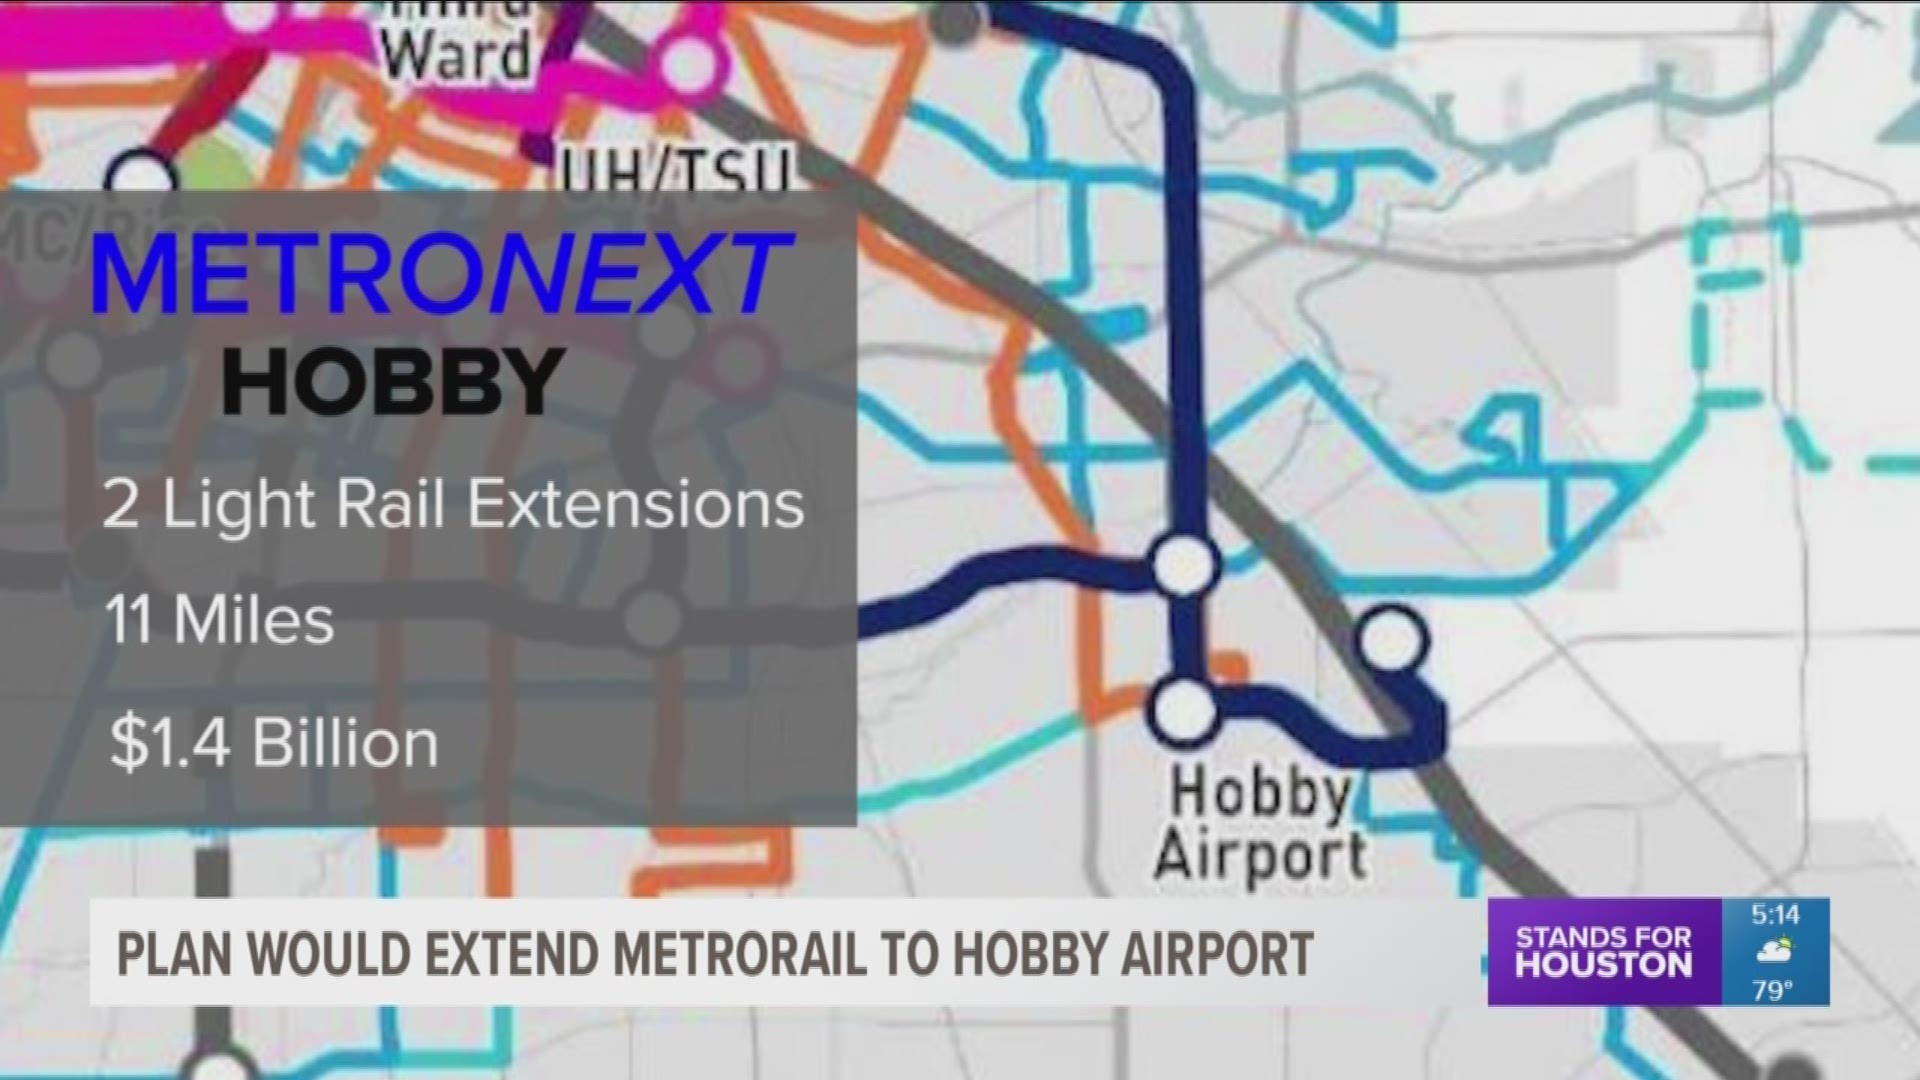 Extending light rail transit to Hobby Airport is on the short list of goals METRO is proposing.